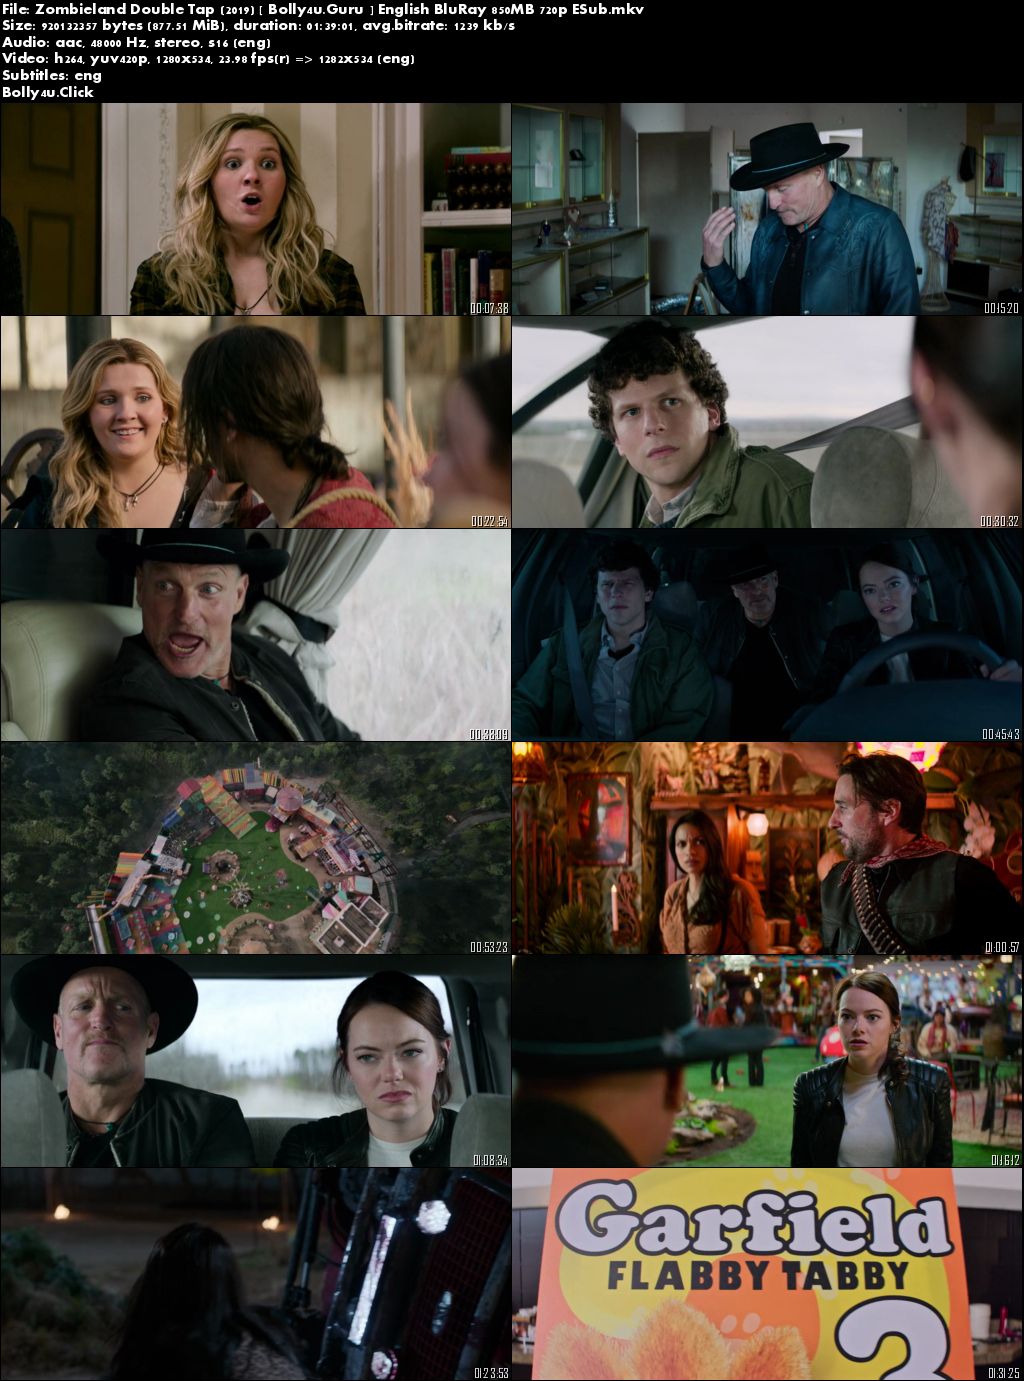 Zombieland Double Tap 2019 BRRip 850Mb English 720p ESub download